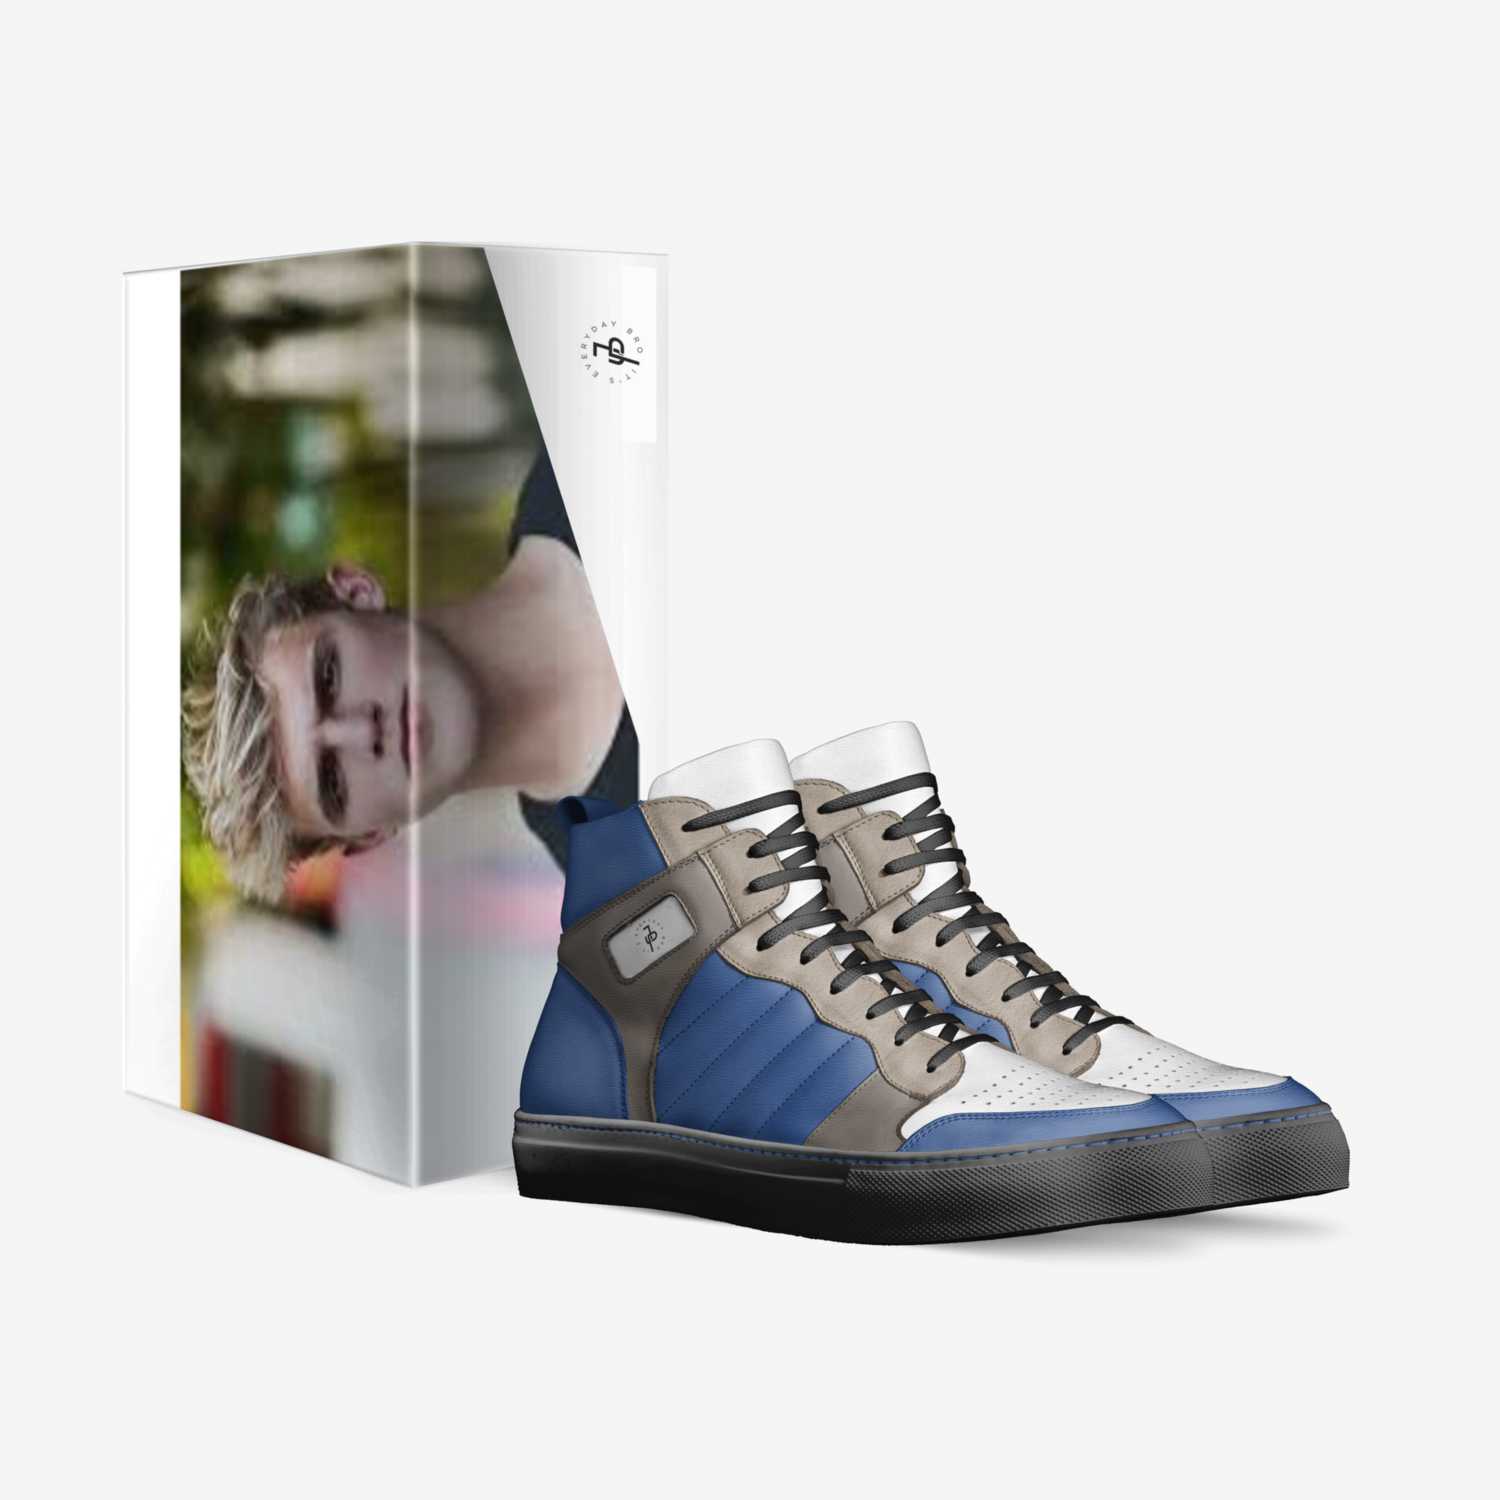 Jake Paul X custom made in Italy shoes by Marty Hendricks | Box view